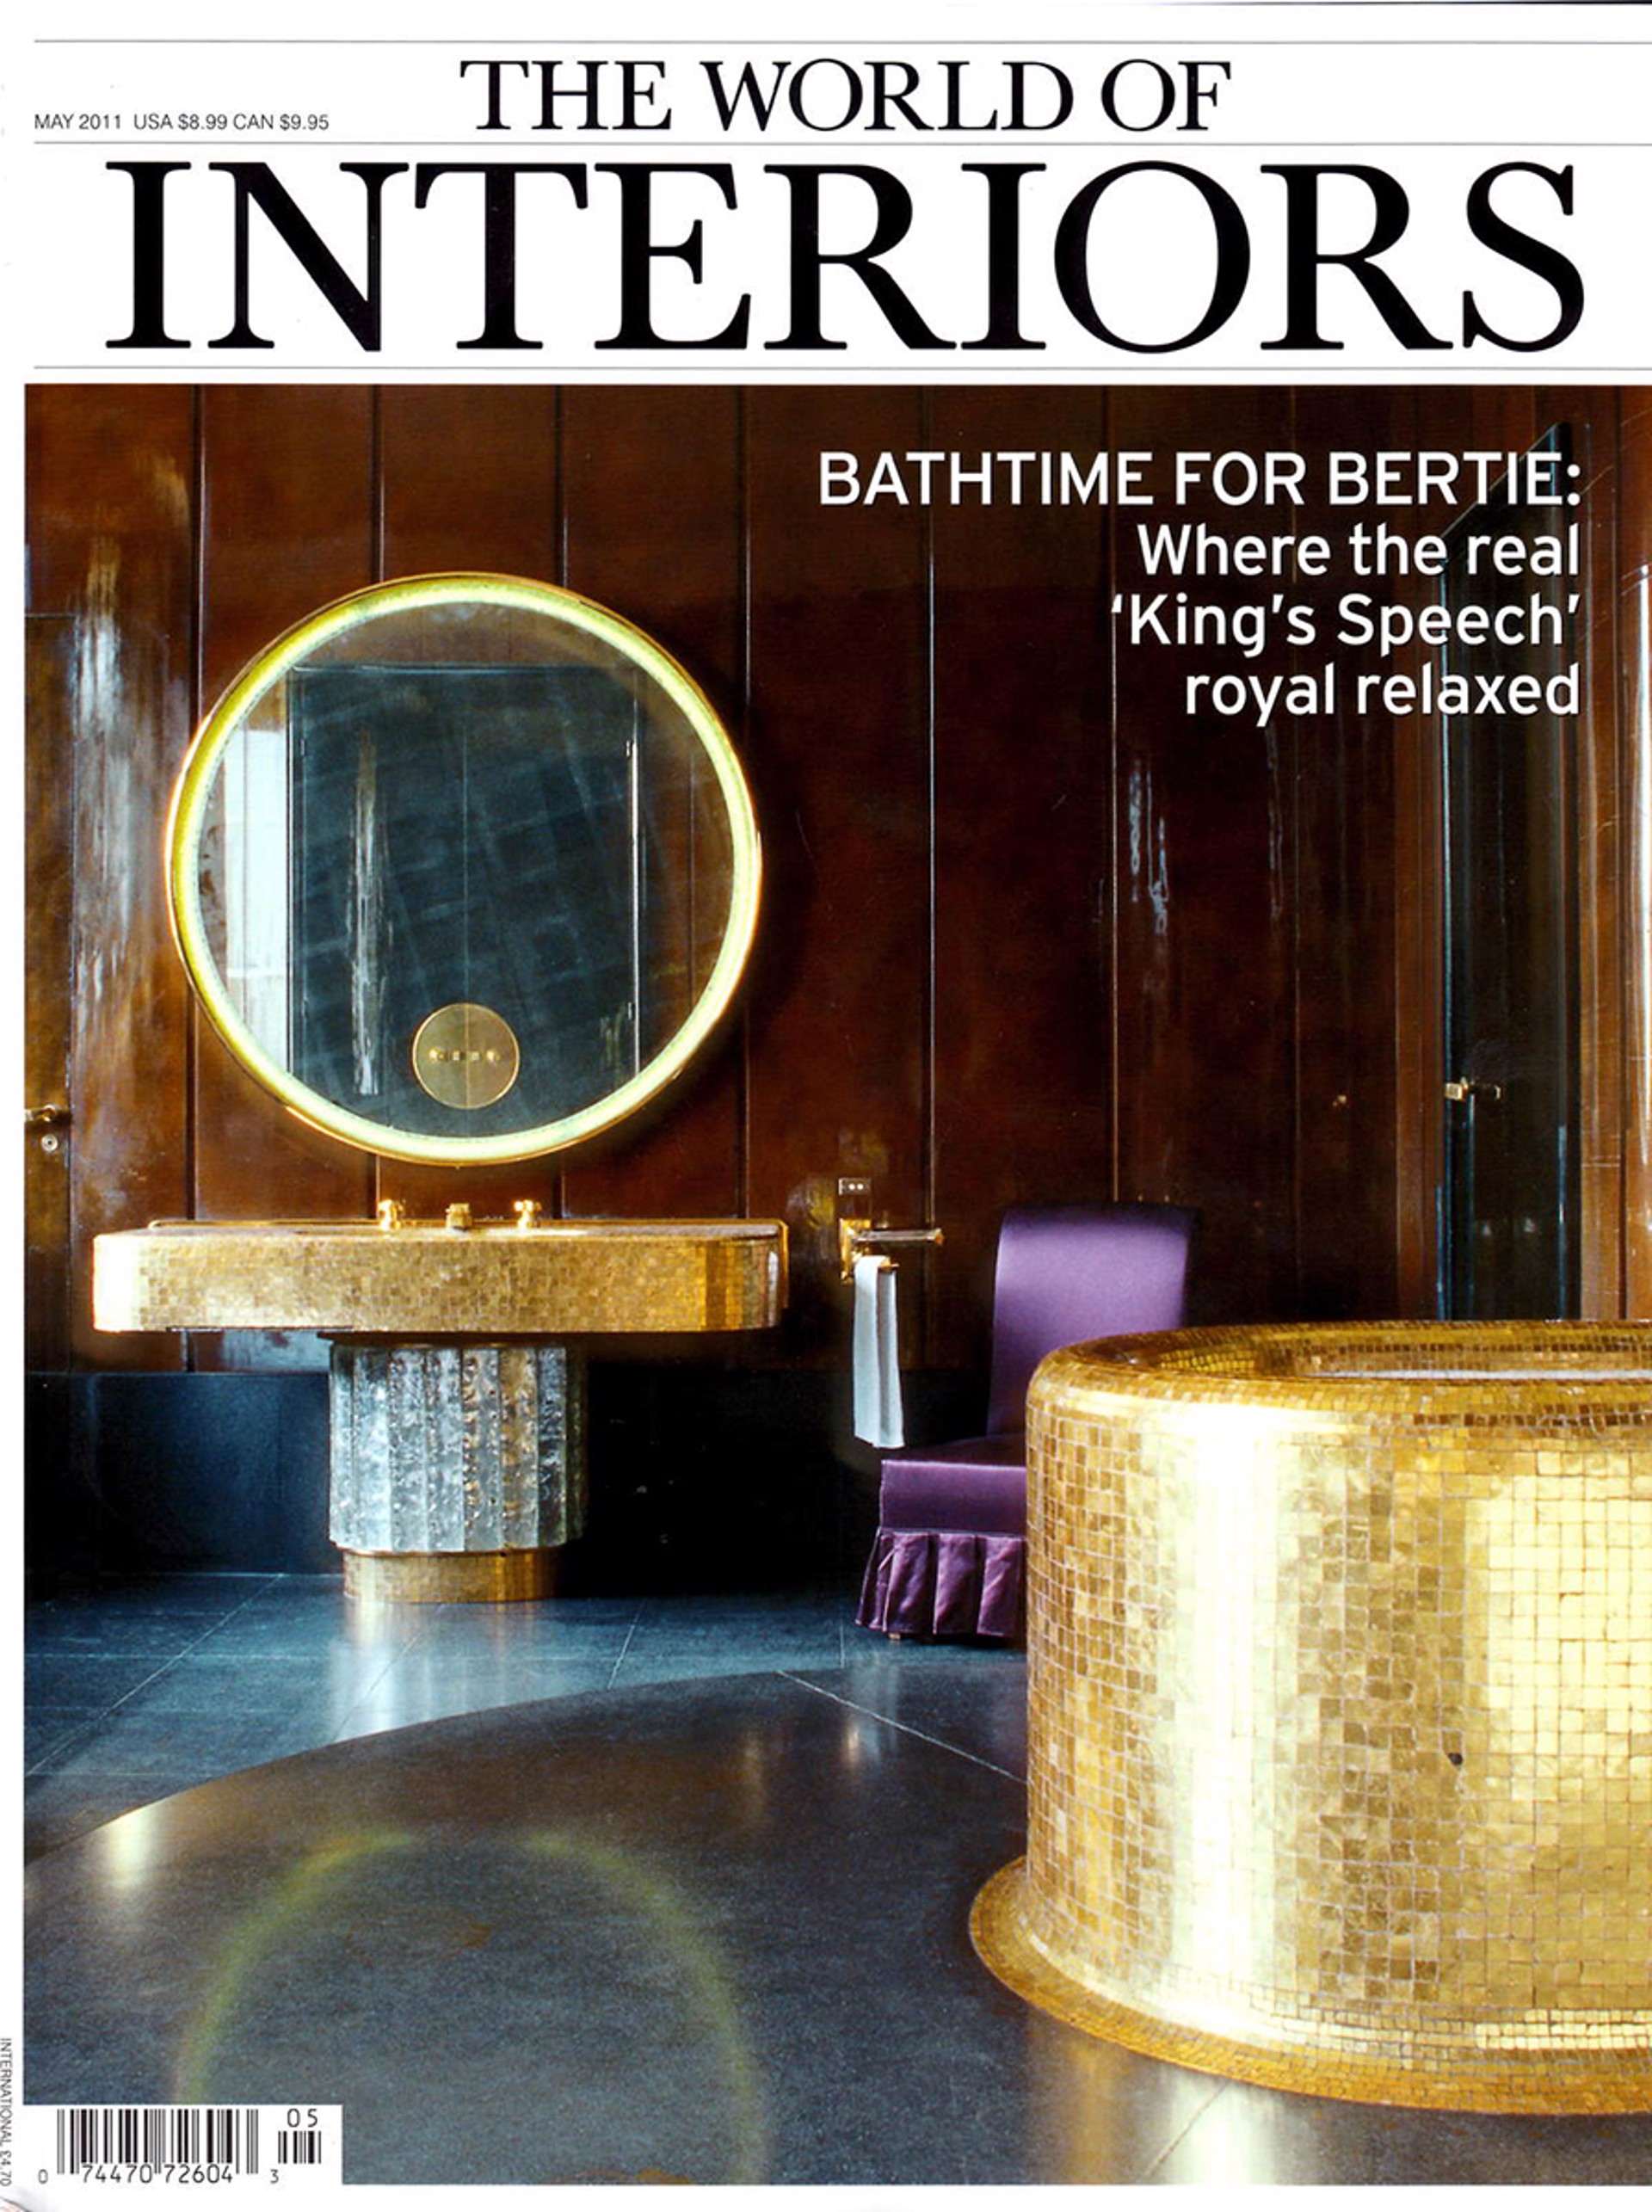 The World of Interiors, May 2011 - Jacques Jarrige